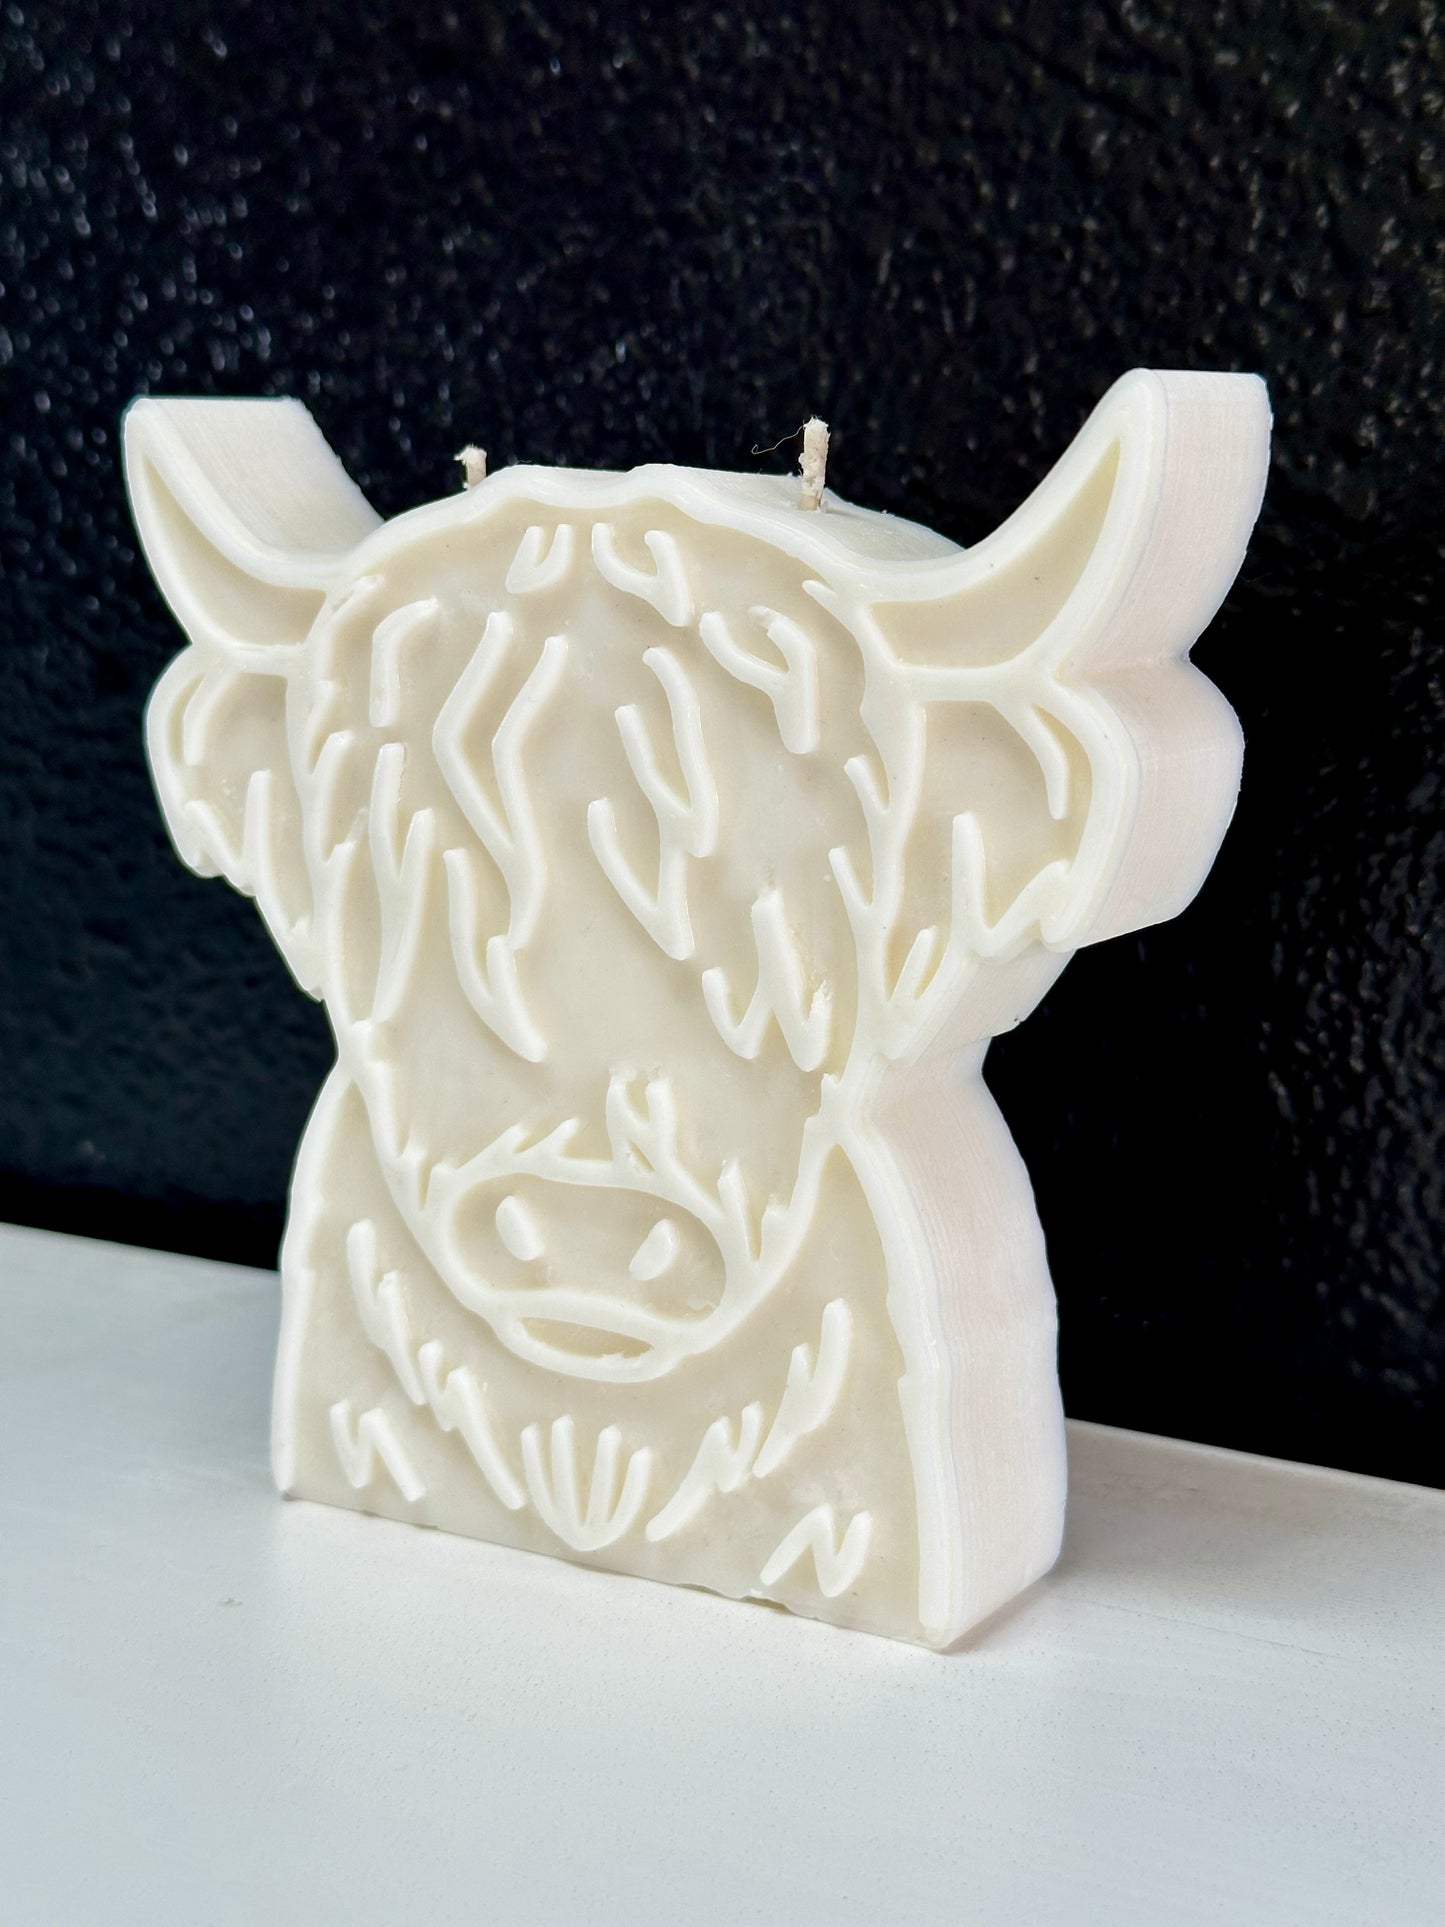 Highland cow free standing Candle